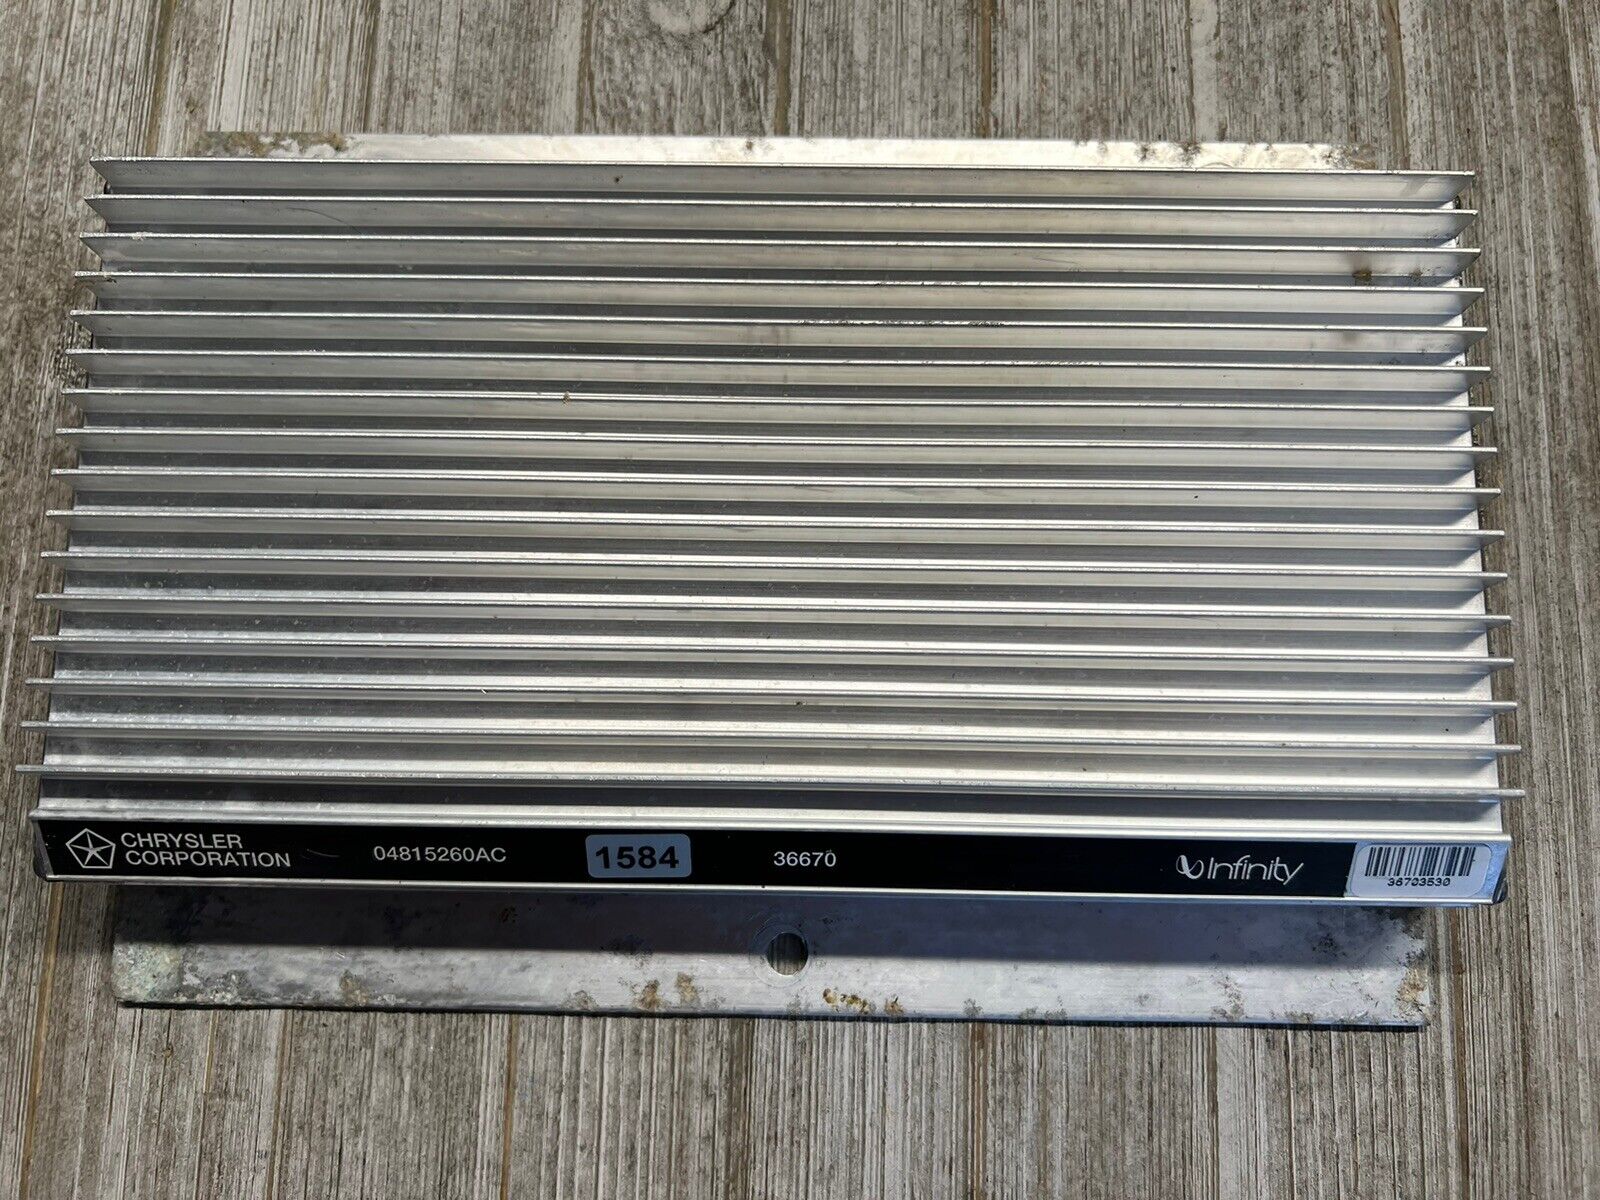 PLYMOUTH PROWLER 97-02 OEM INFINITY CHRYSLER CORPORAT AMPLIFIER STEREO 36670 AMP